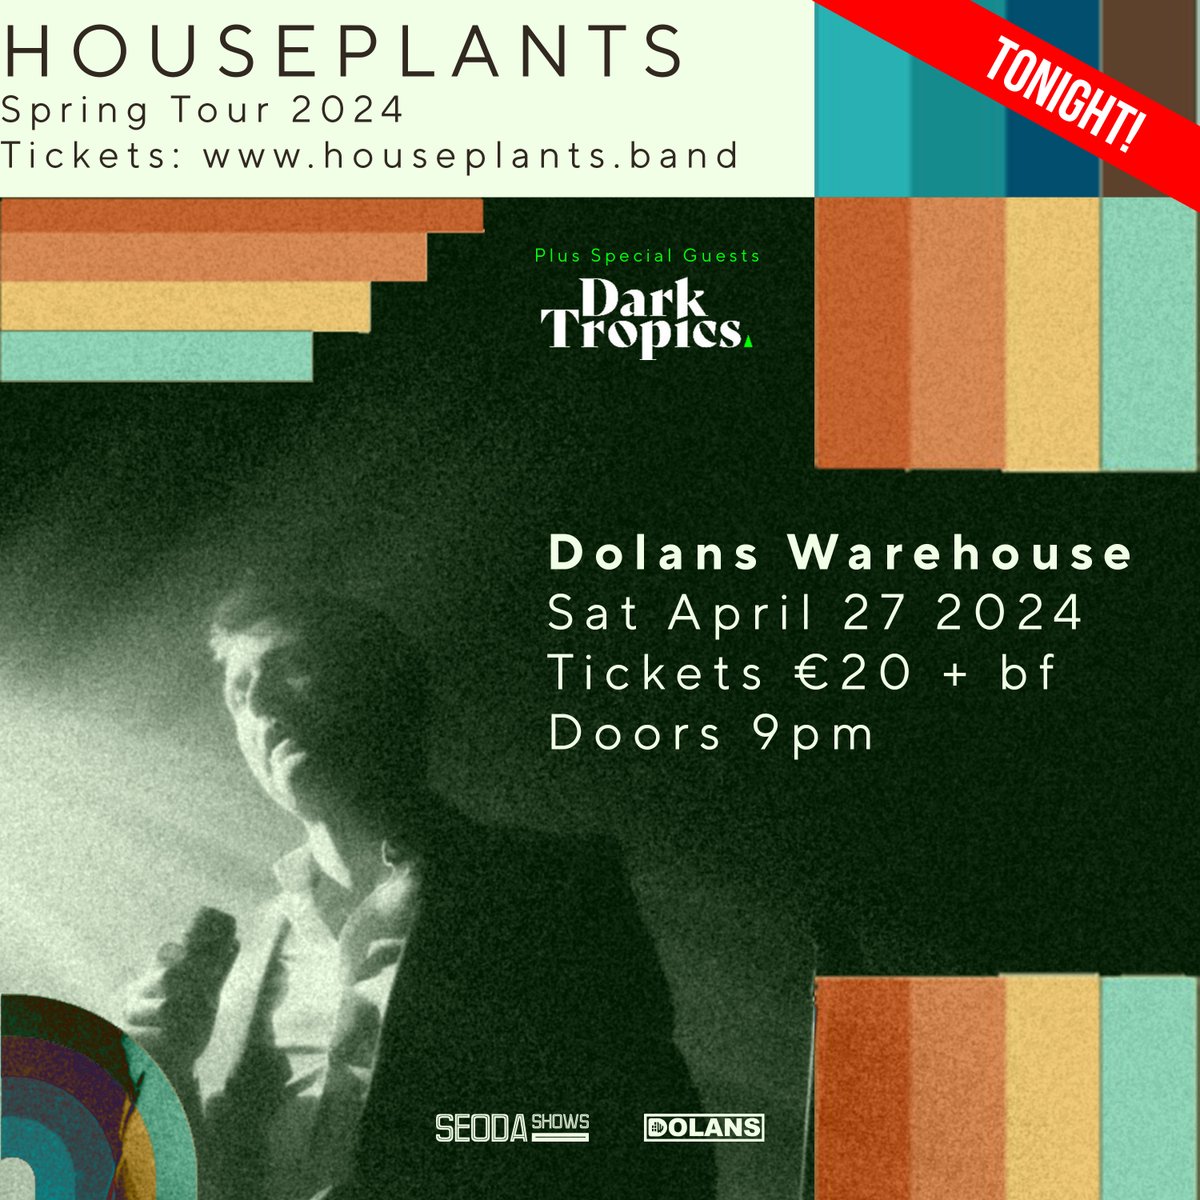 ***TONIGHT AT DOLANS*** Seoda Shows presents Housplants + special guests Dark Tropics Dolans Warehouse Doors 9pm Tickets here: dolans.yapsody.com/event/index/80…